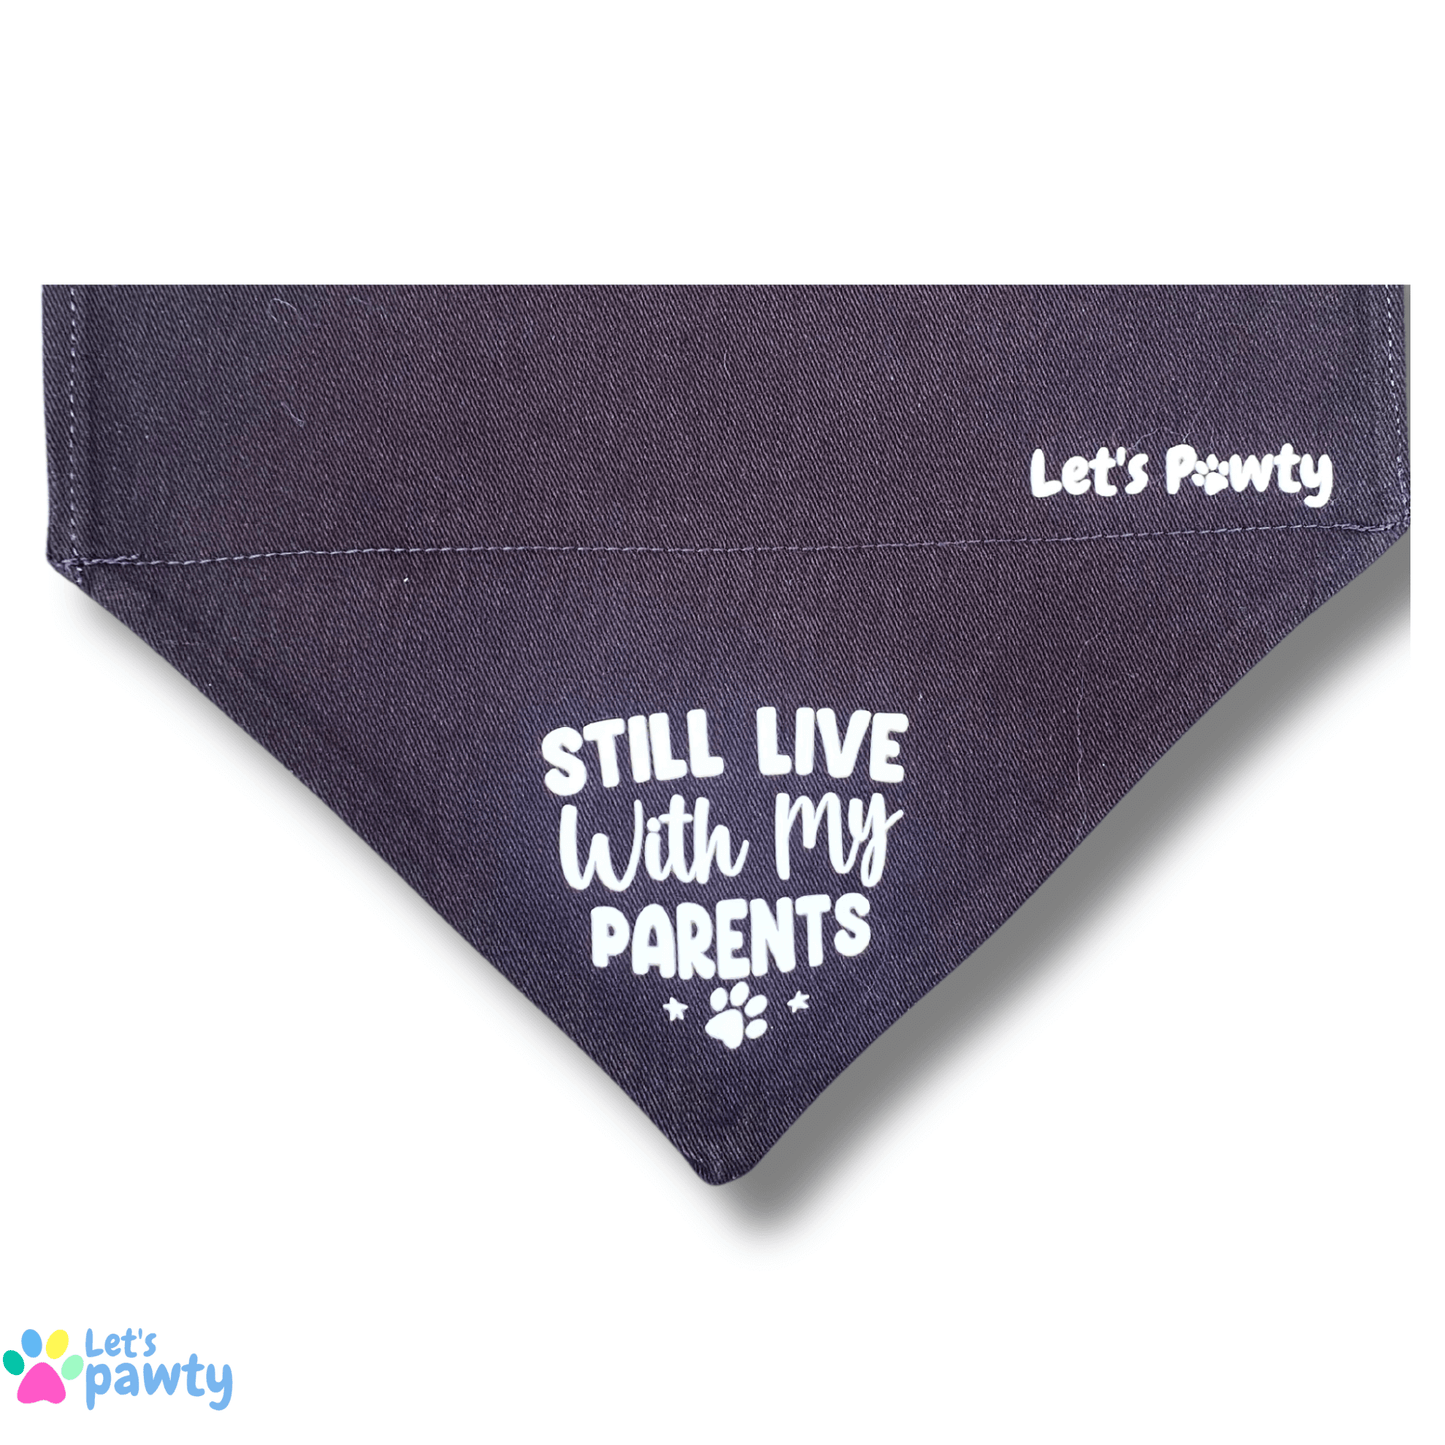 Still live with my parents reversible dog bandana, let's pawty 